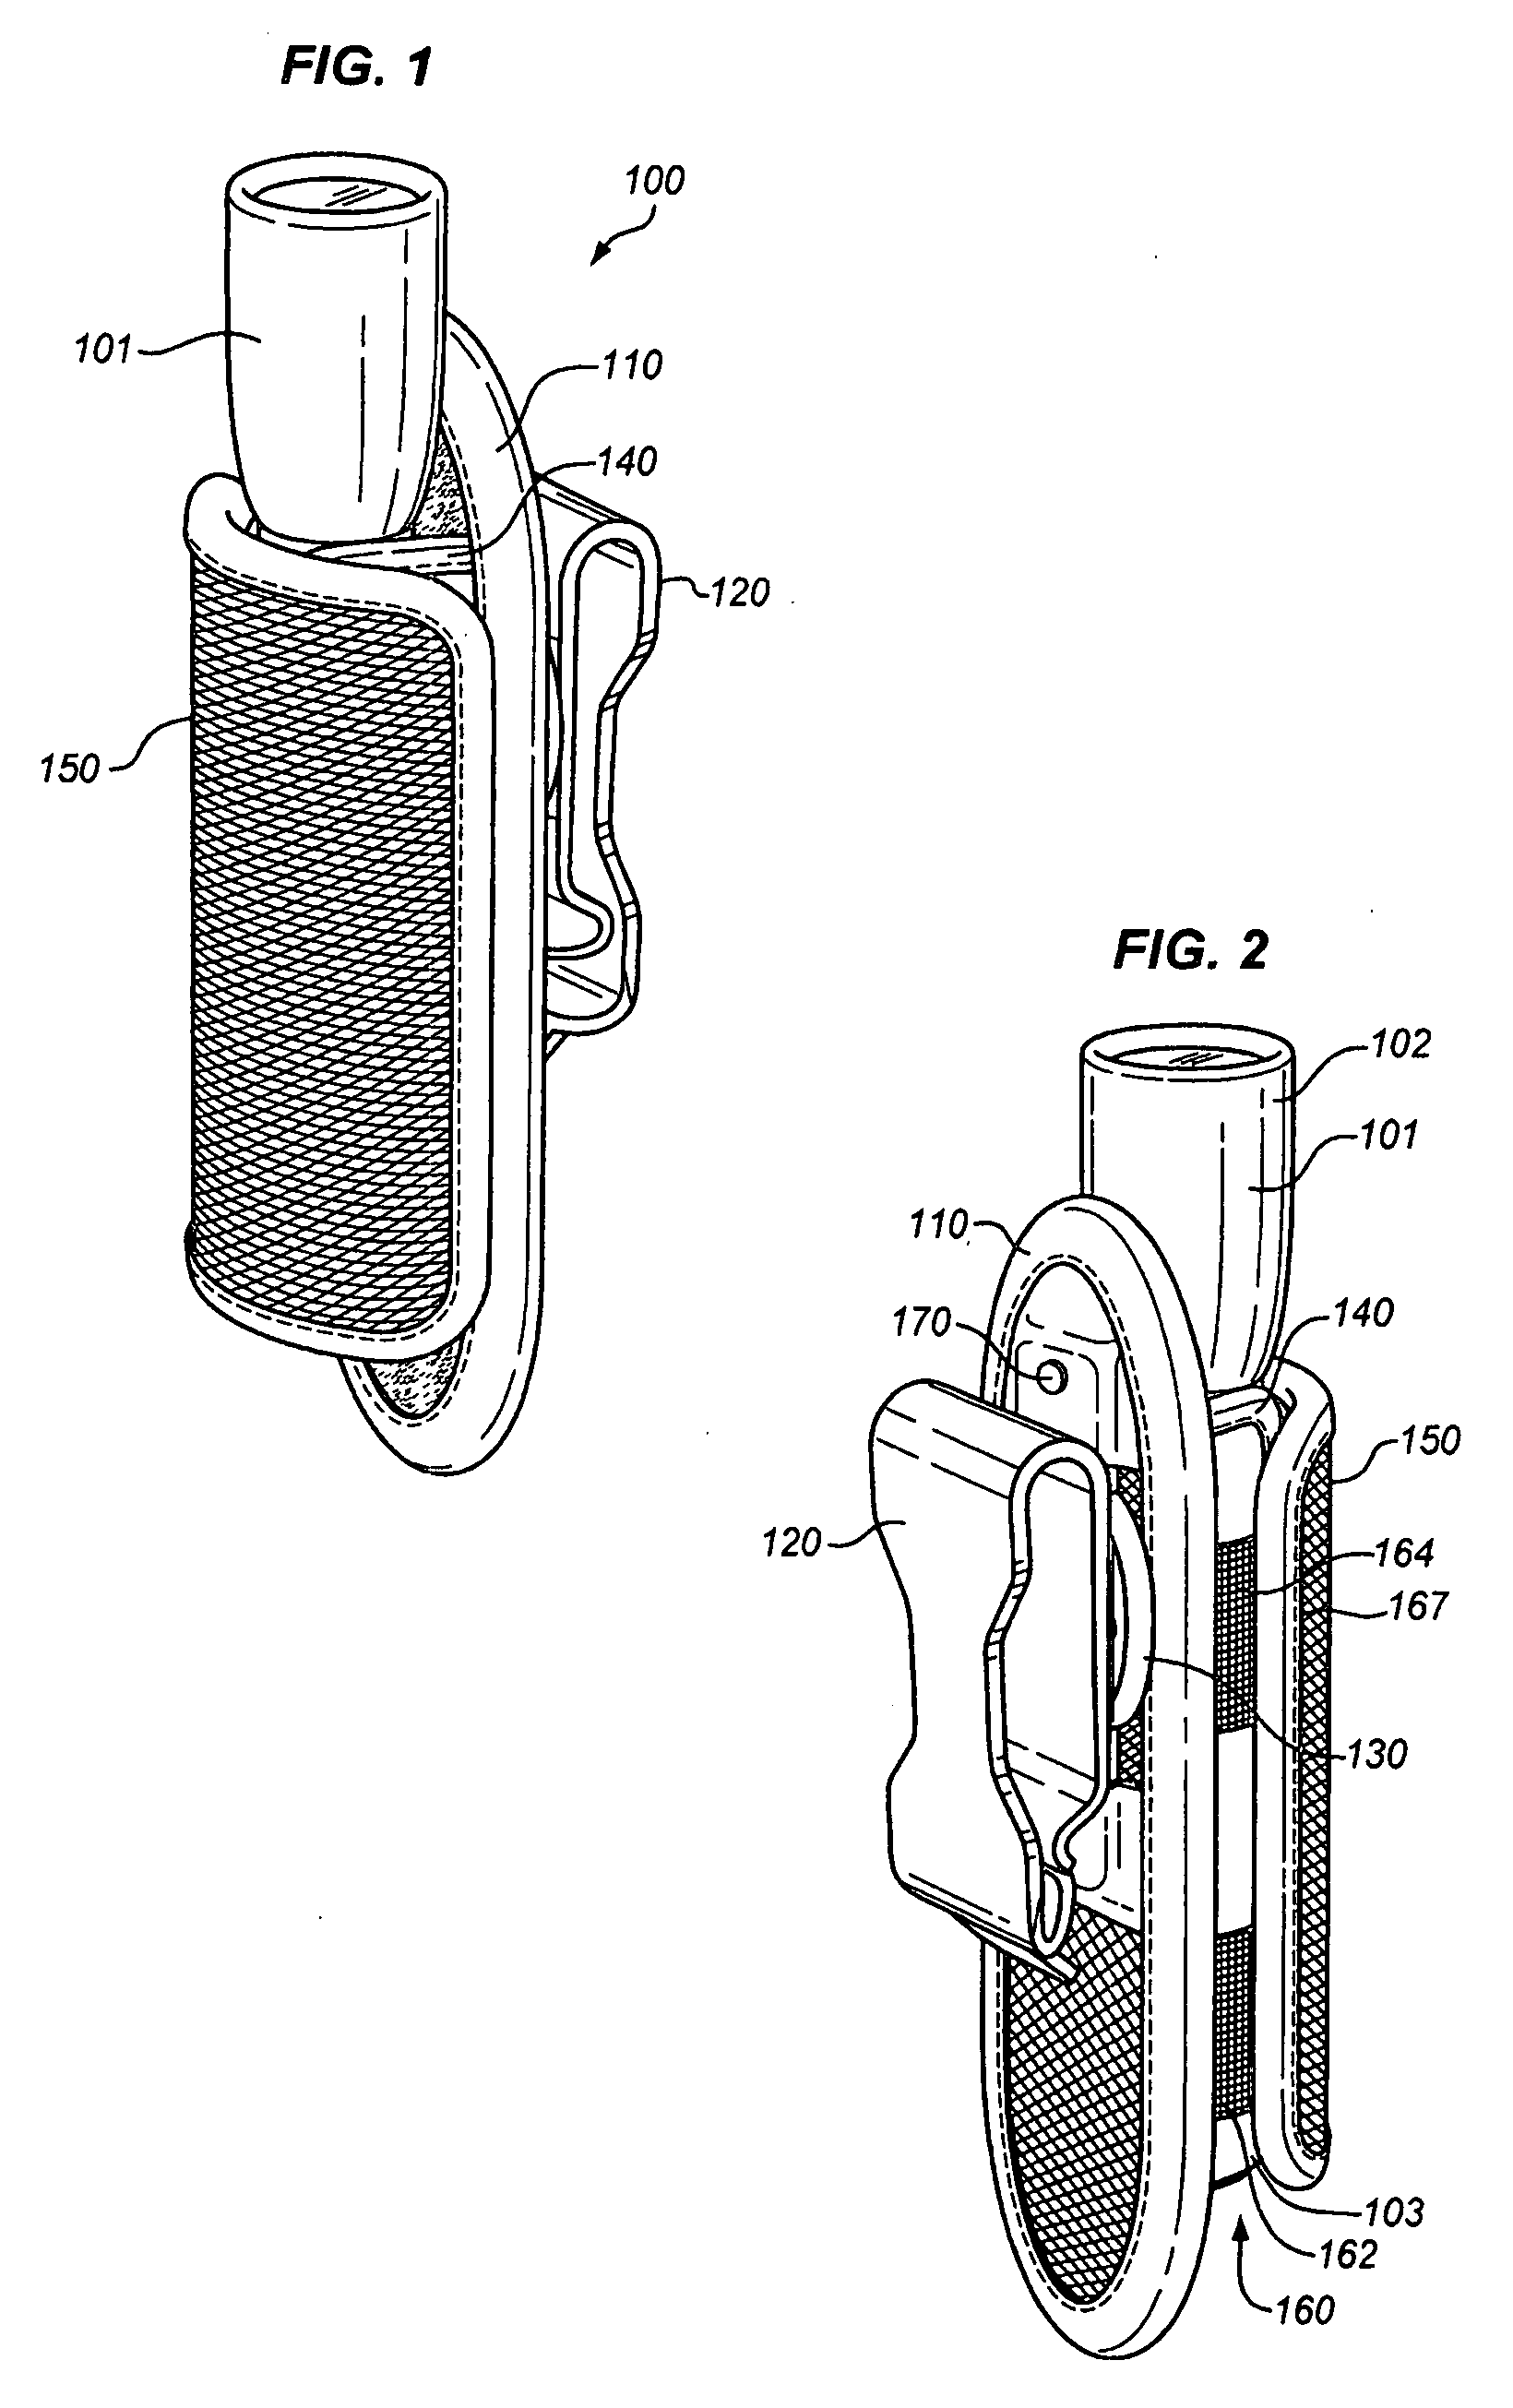 Self-adjusting holster particularly adapted for holding implements of a wide range of sizes